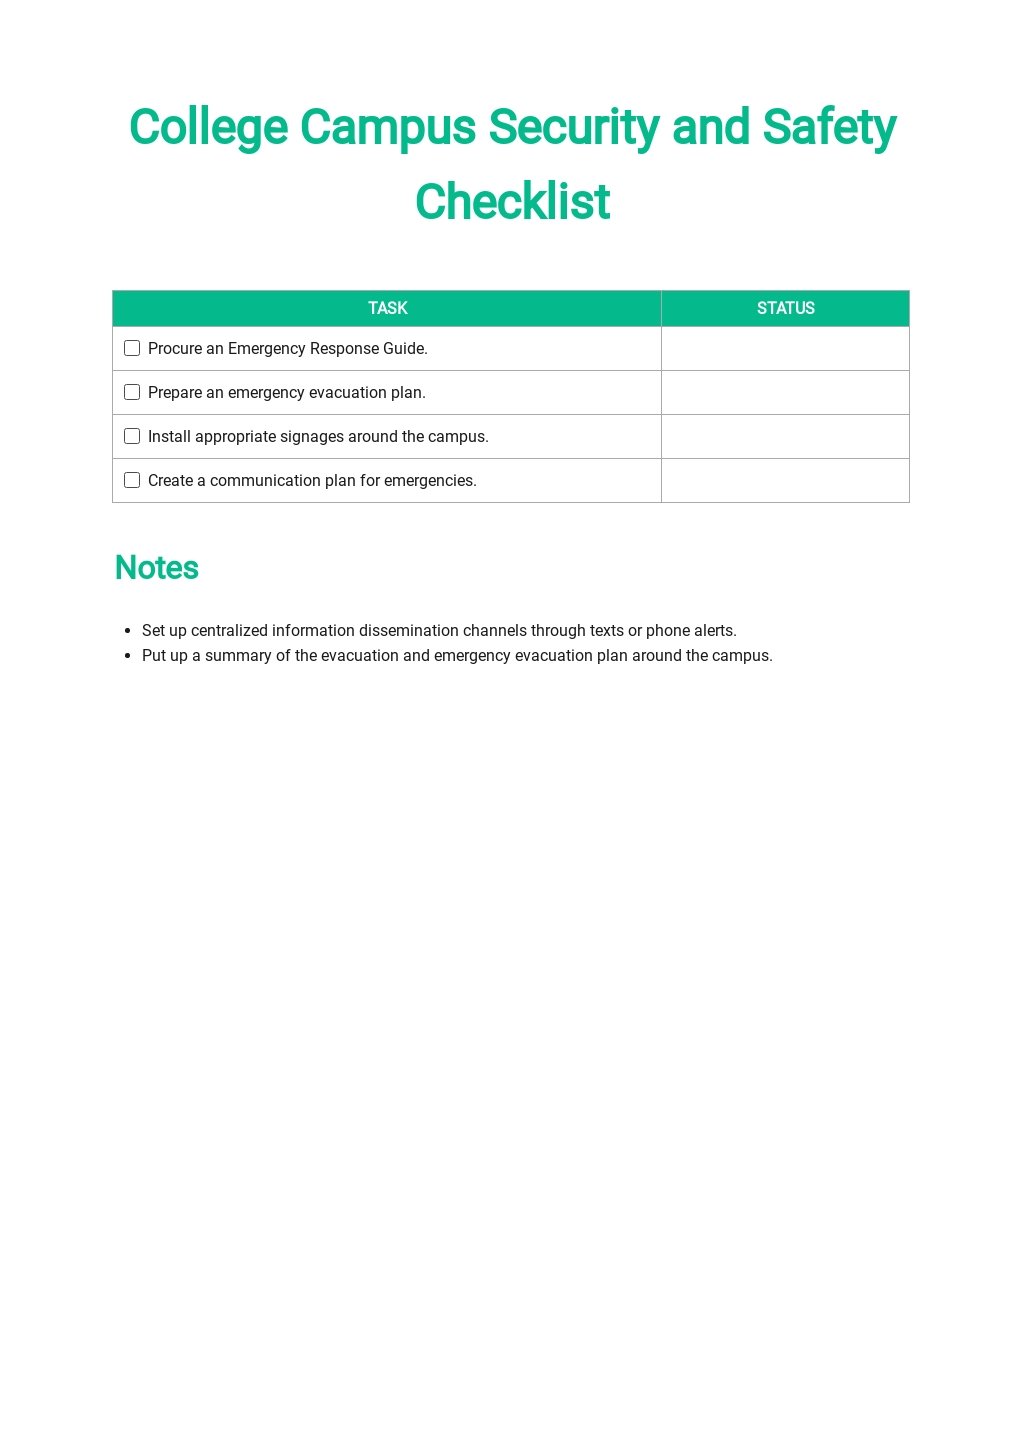 College Campus Security and Safety Checklist Template.jpe